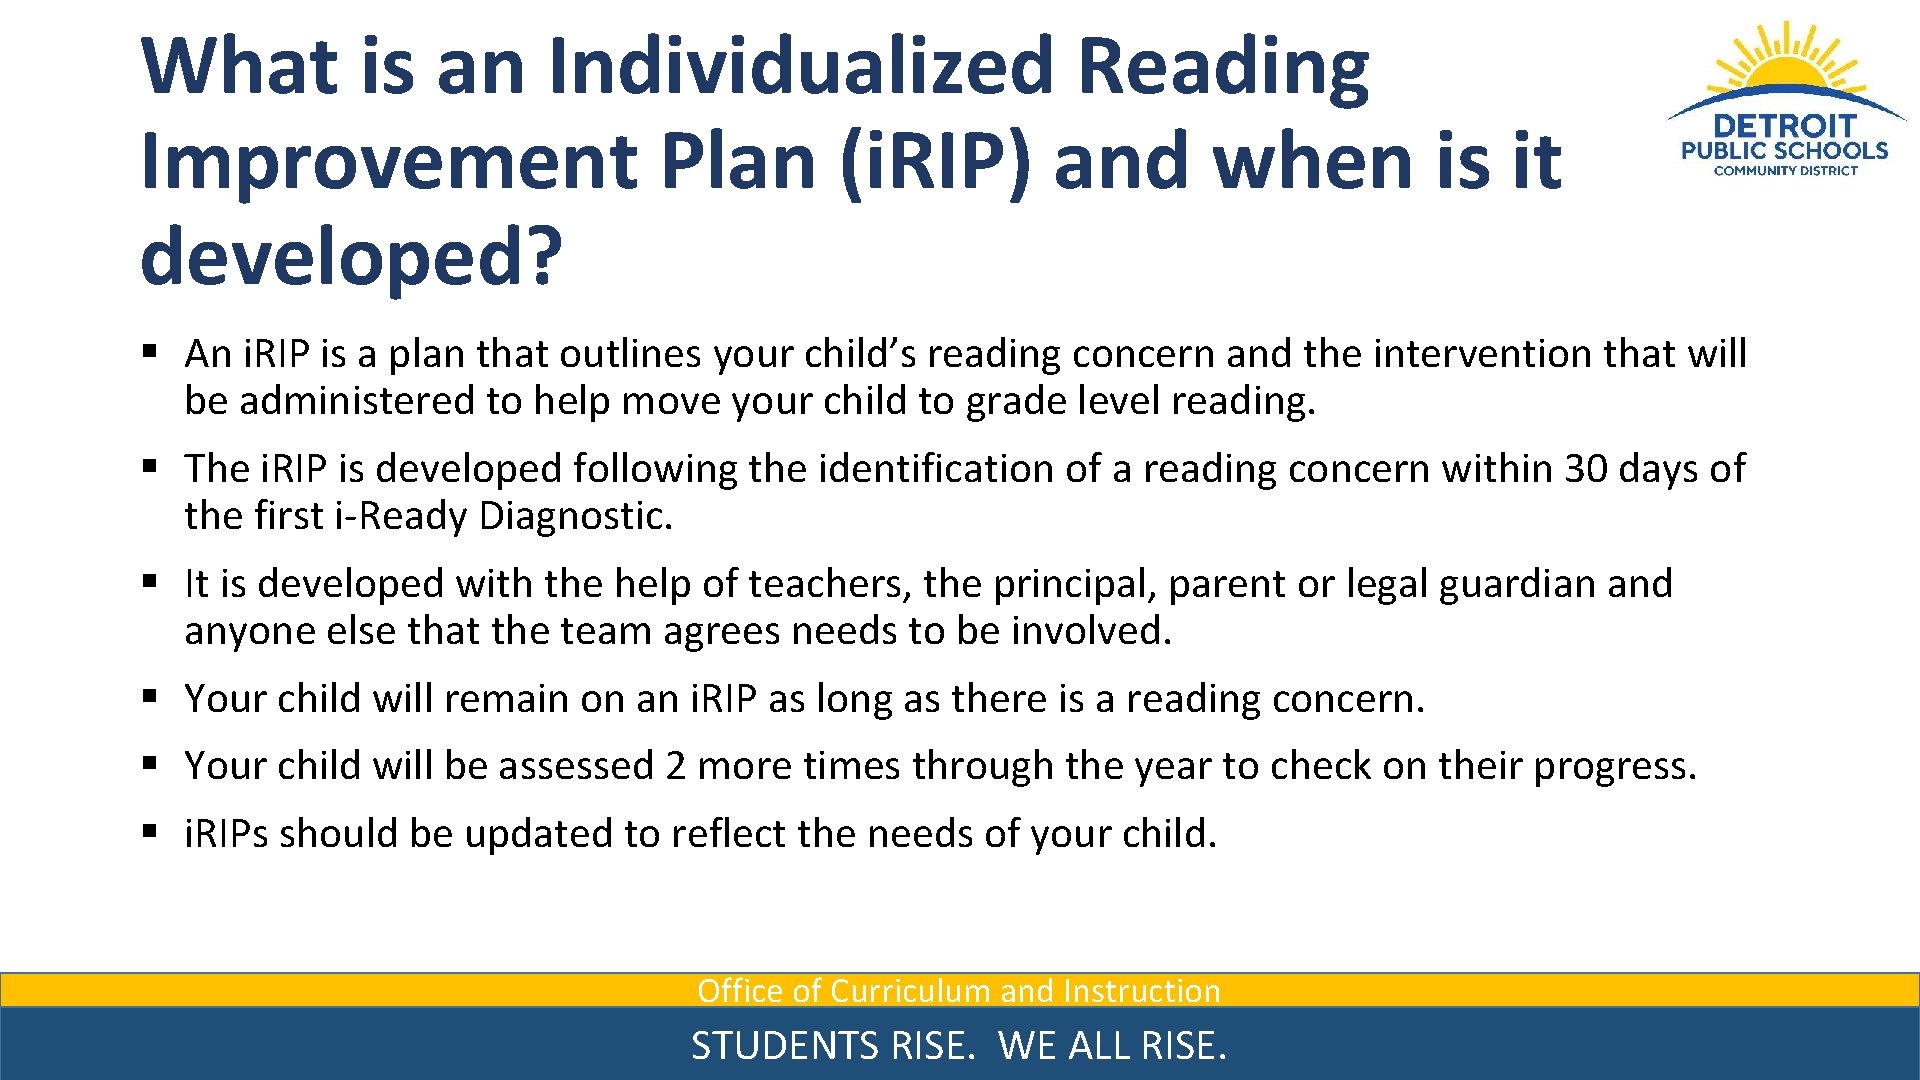 What is an Individualized Reading Improvement Plan (i. RIP) and when is it developed?